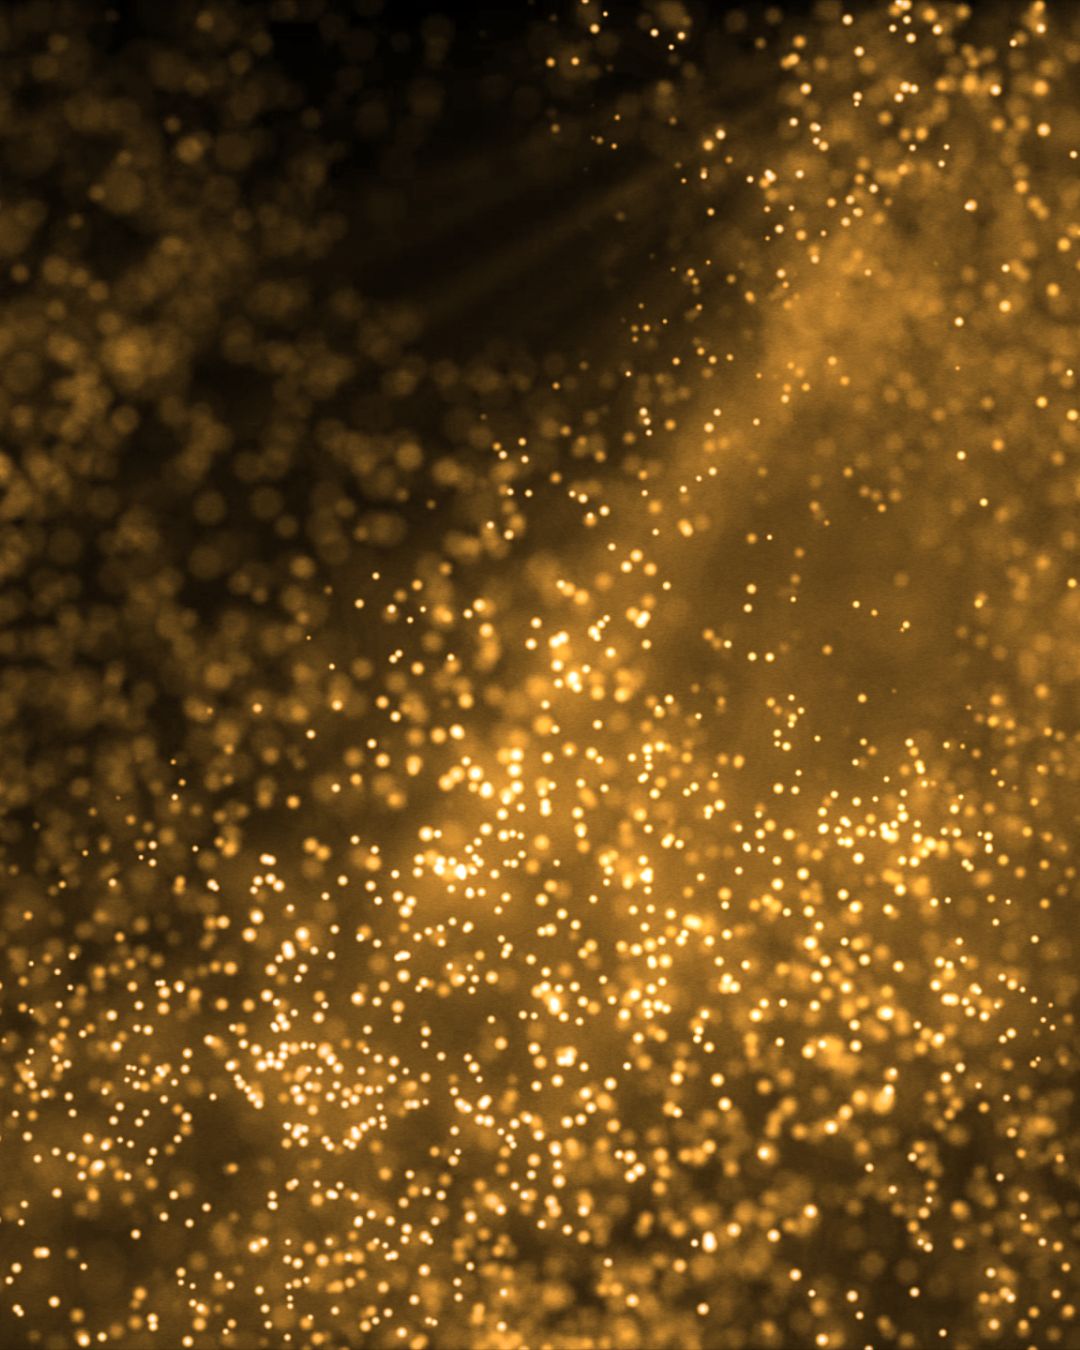 Gold Dust Particles Background - Post by EnjoystX